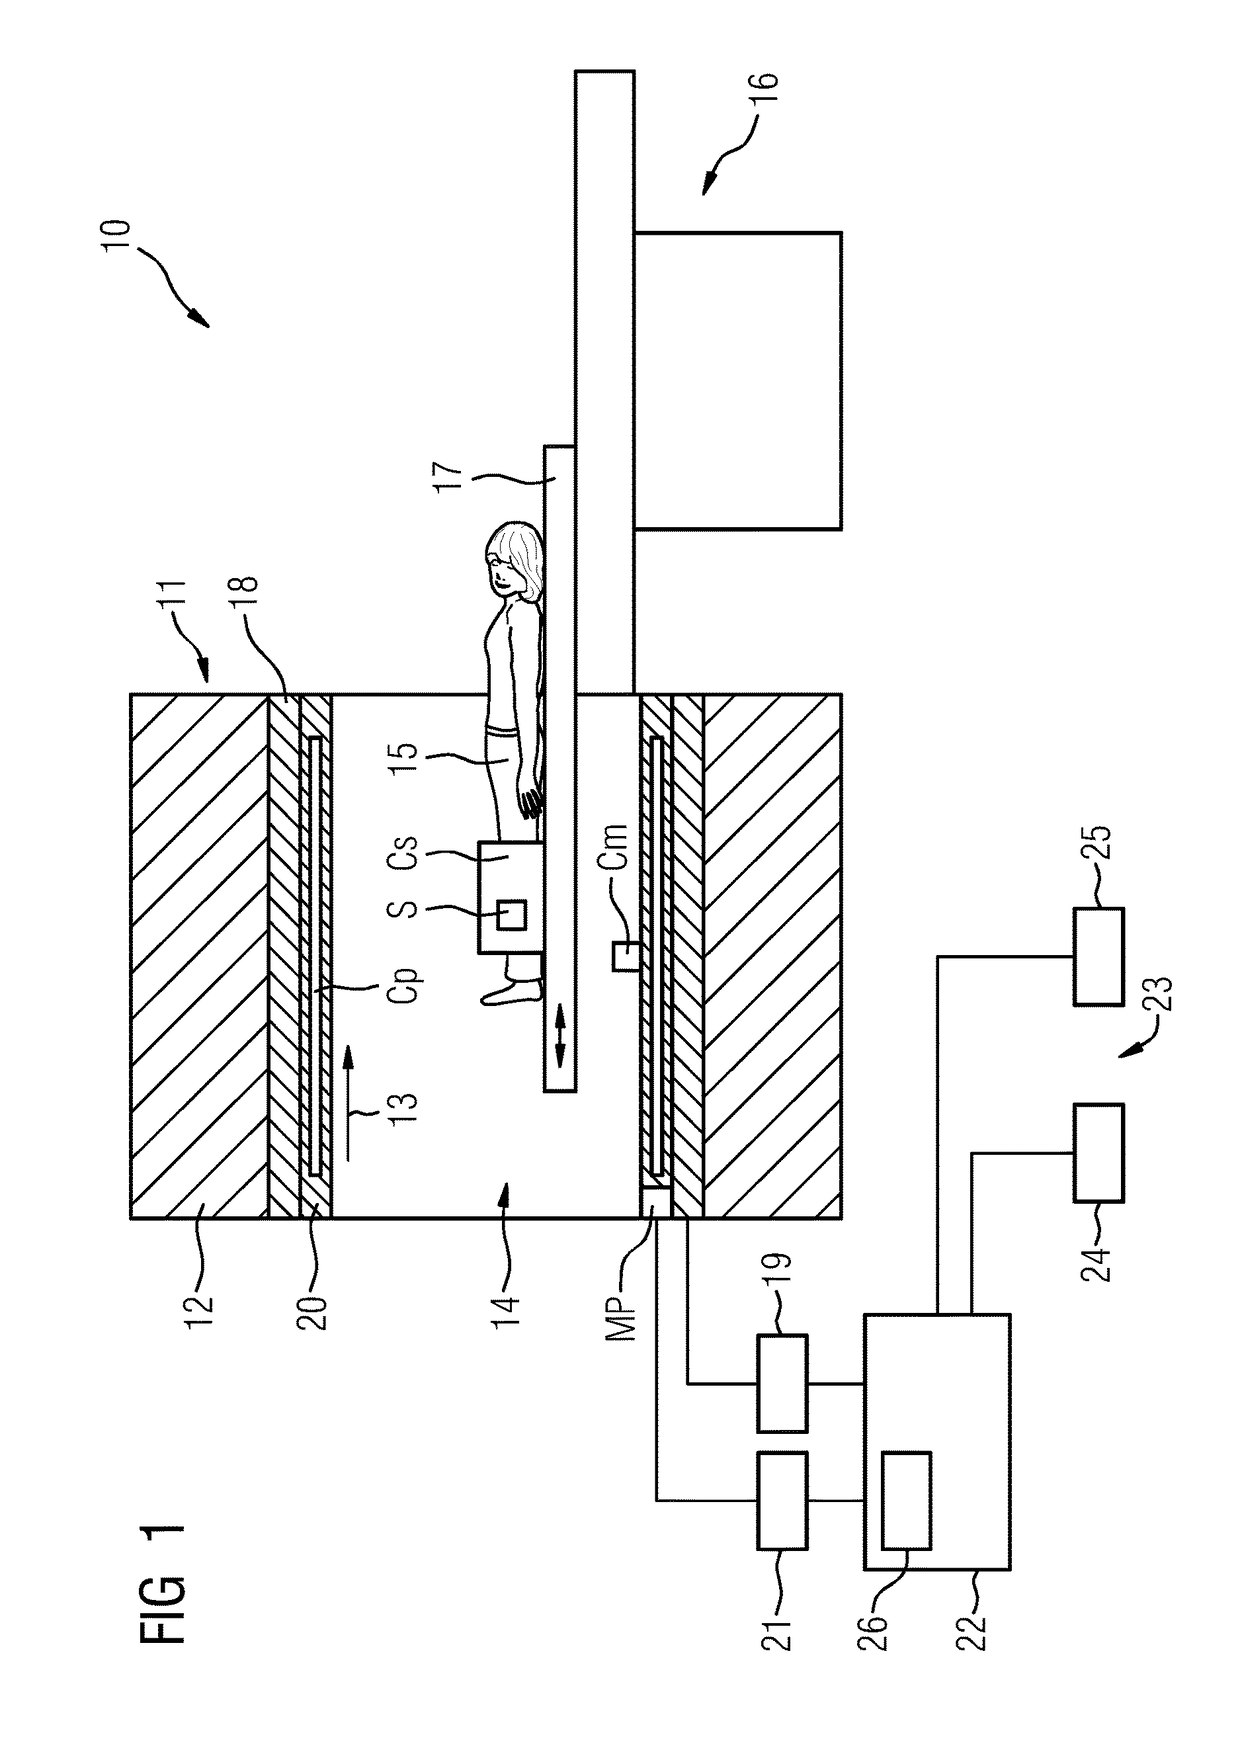 Monitoring an absorption rate of inductively coupled coils